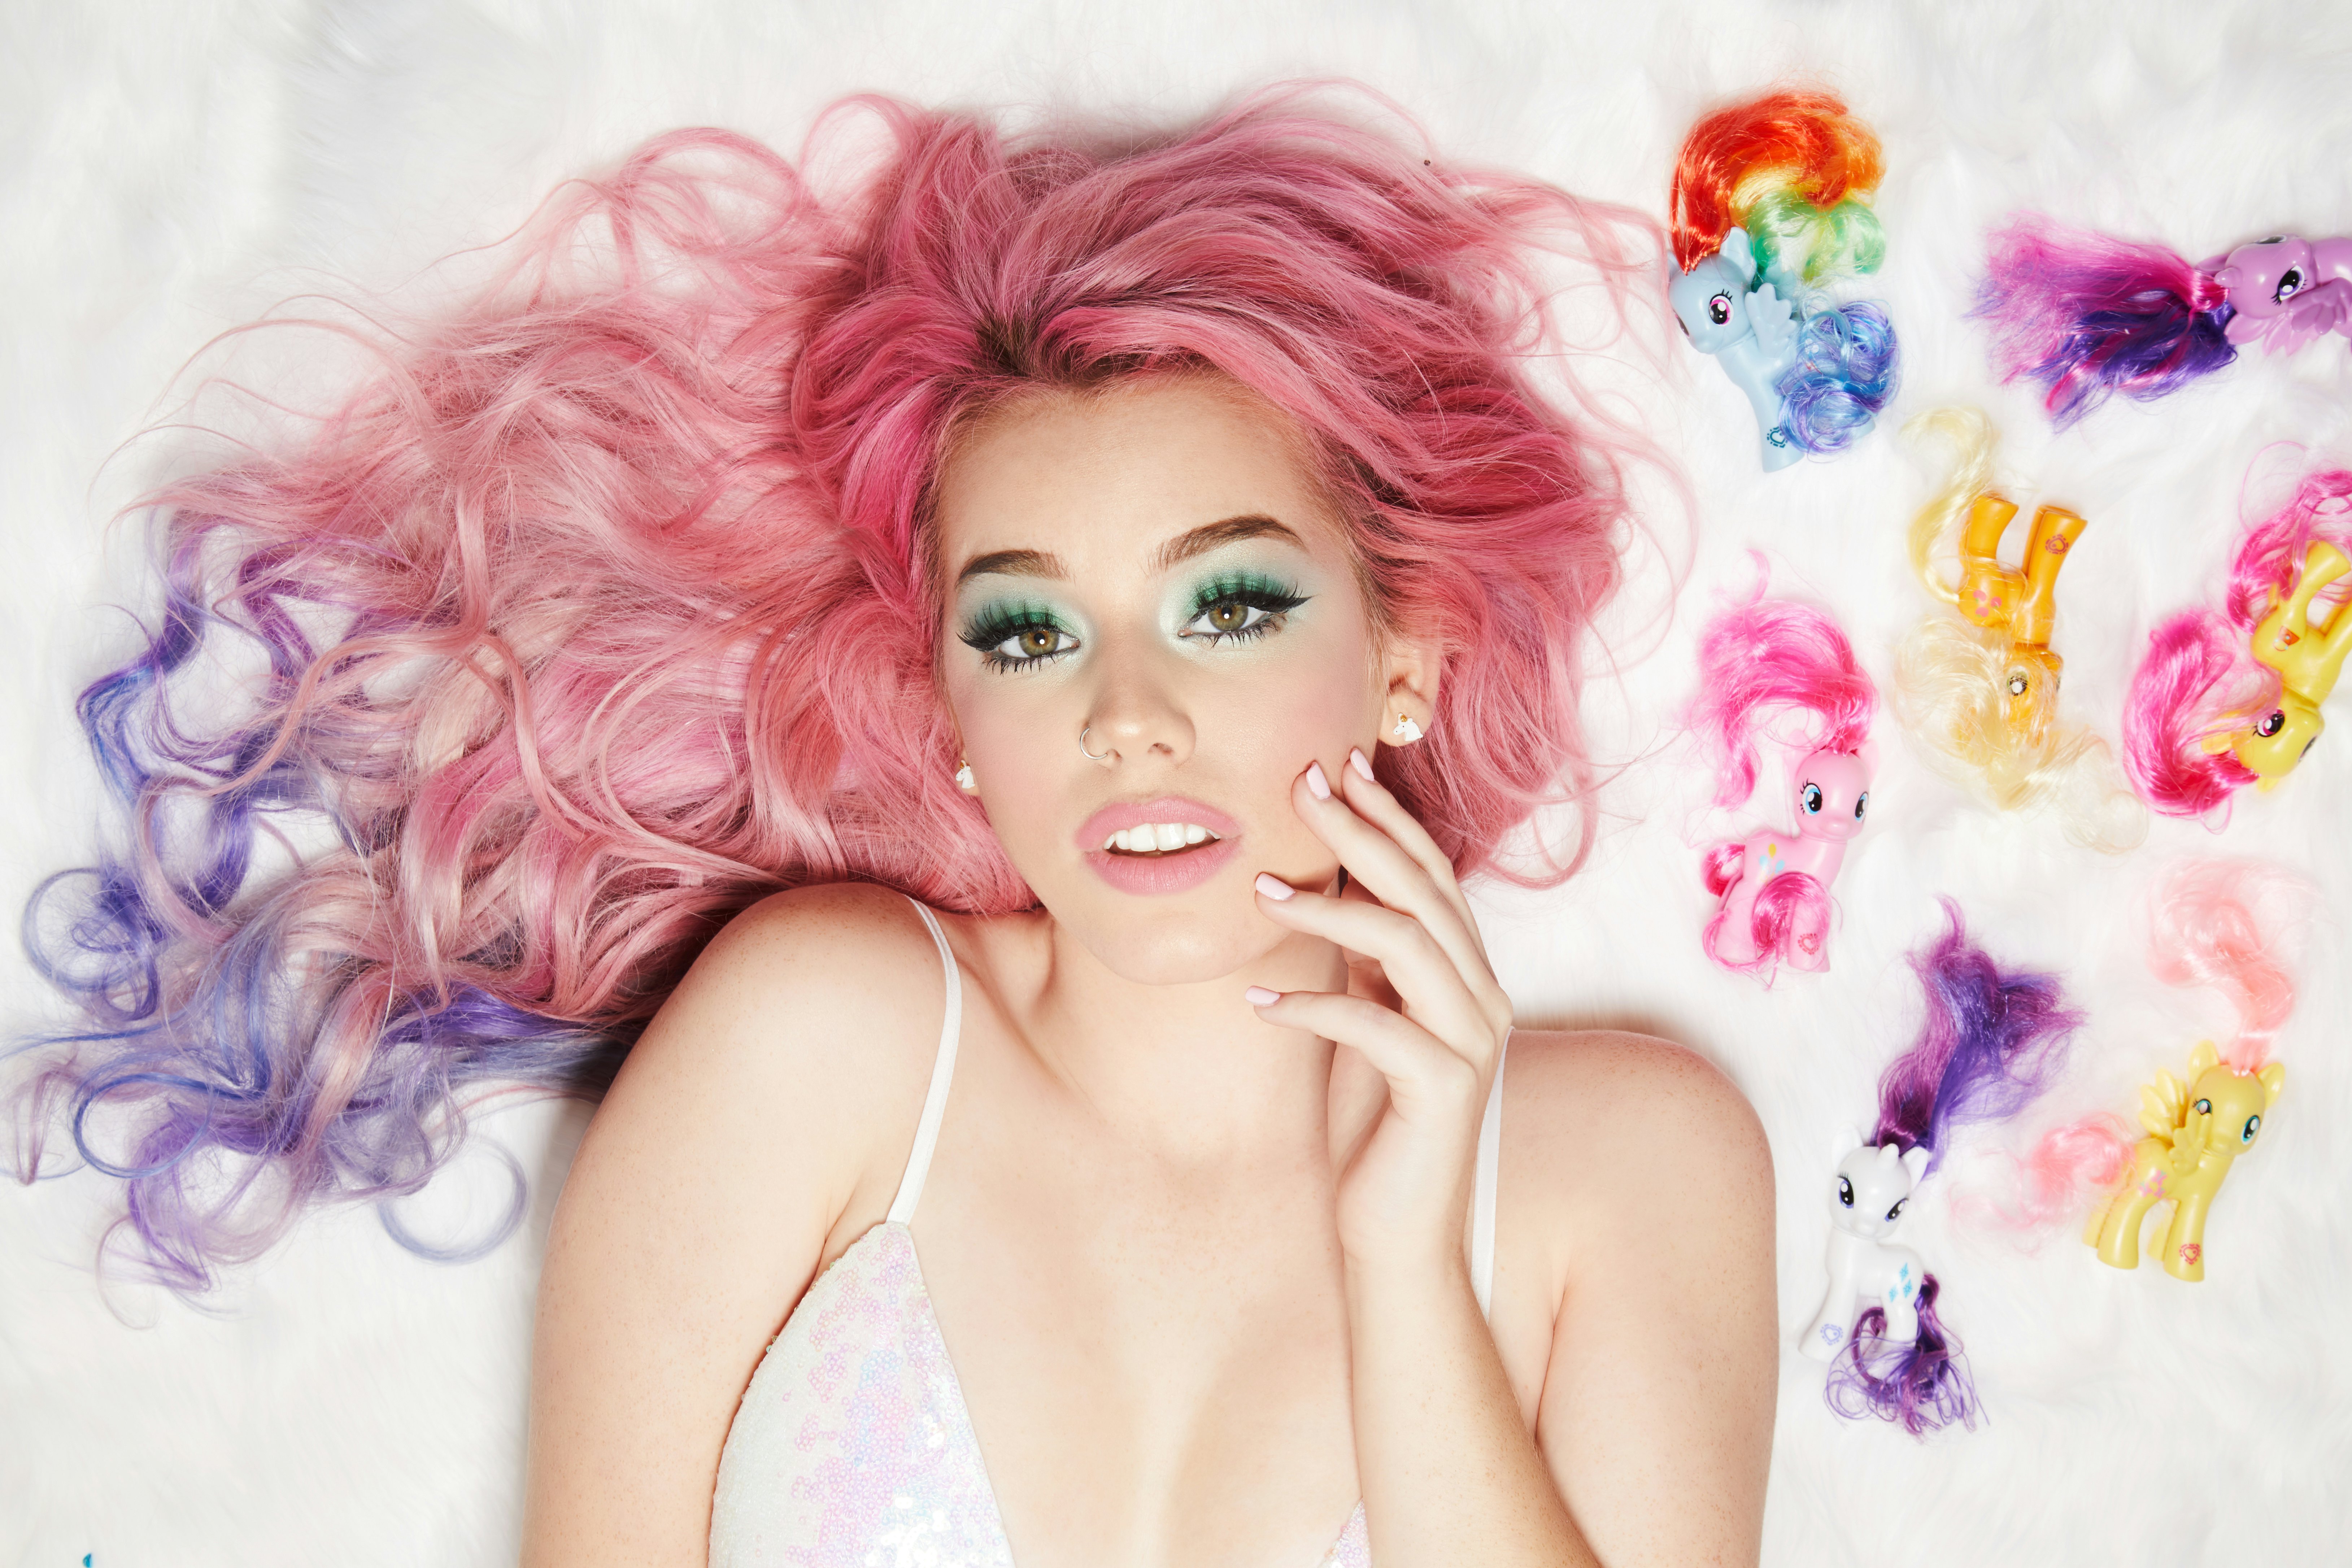 PUR Cosmetics' 'My Little Pony: The Movie' Collection Might Make